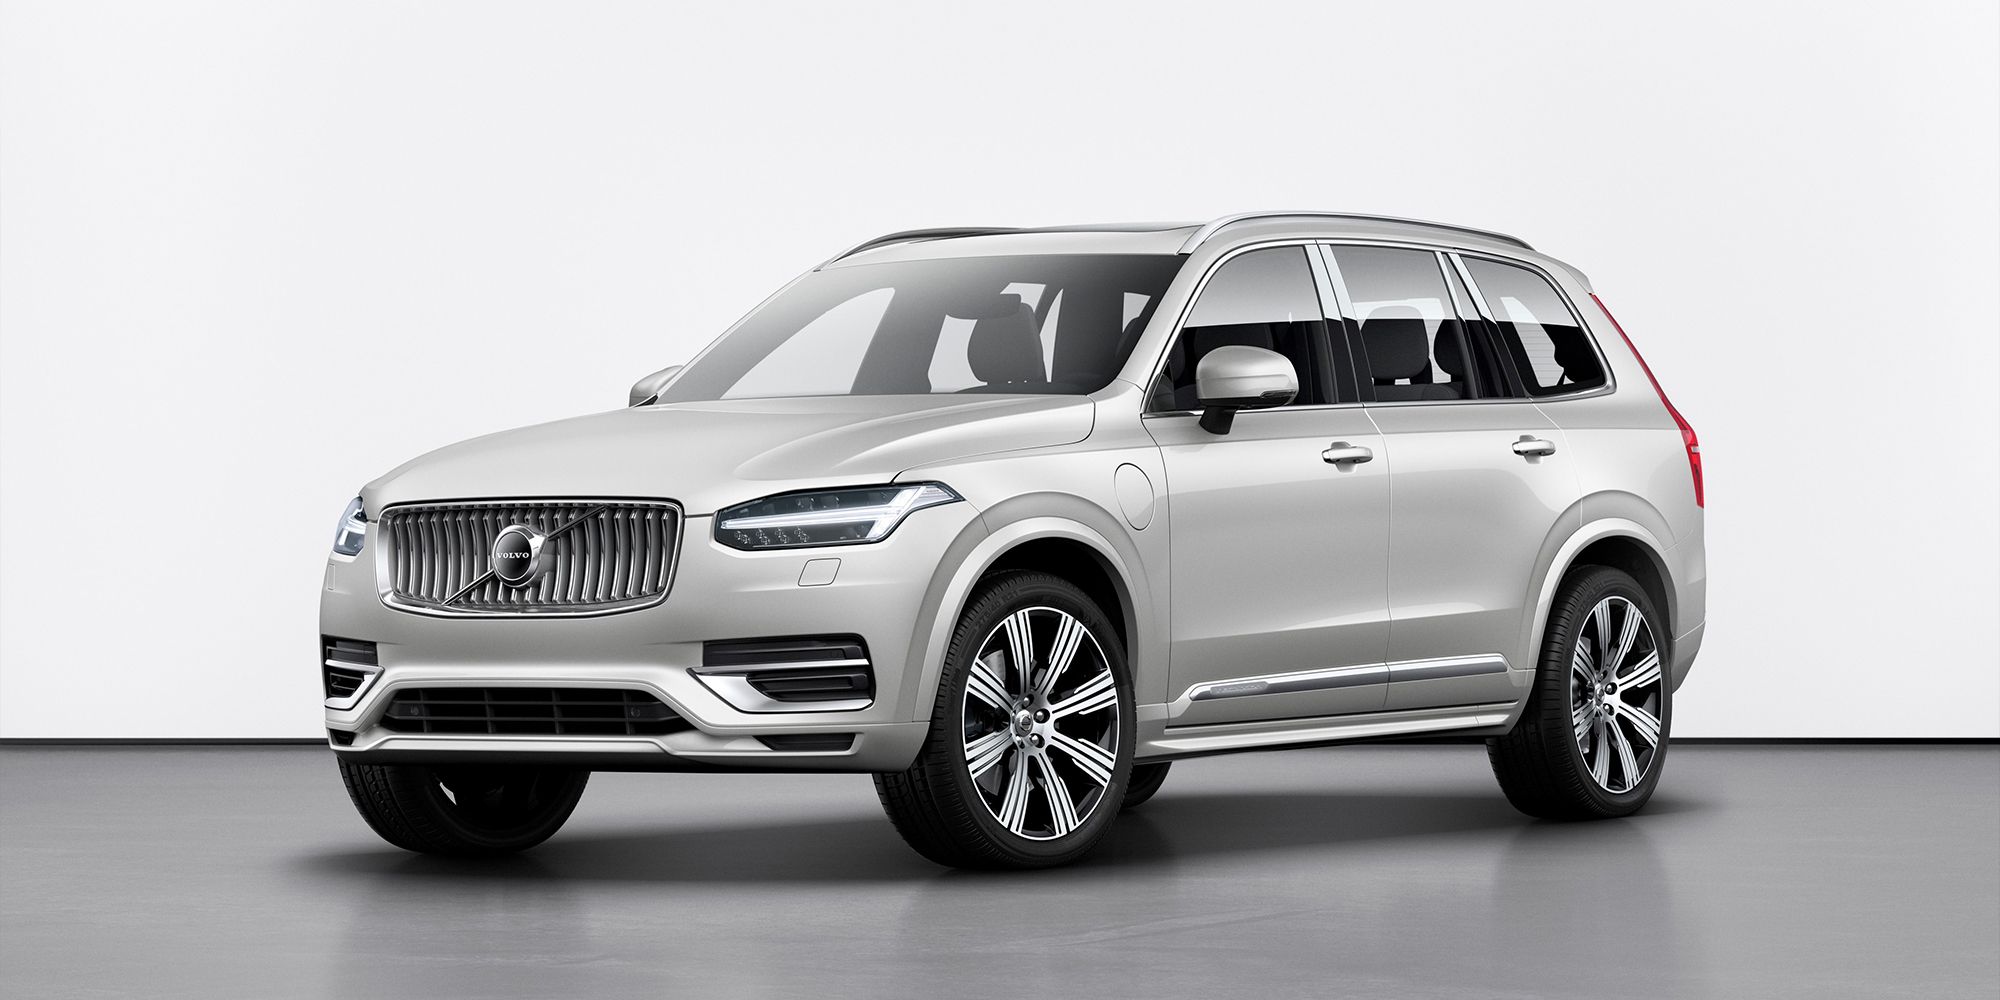 Front 3/4 view of the Volvo XC90